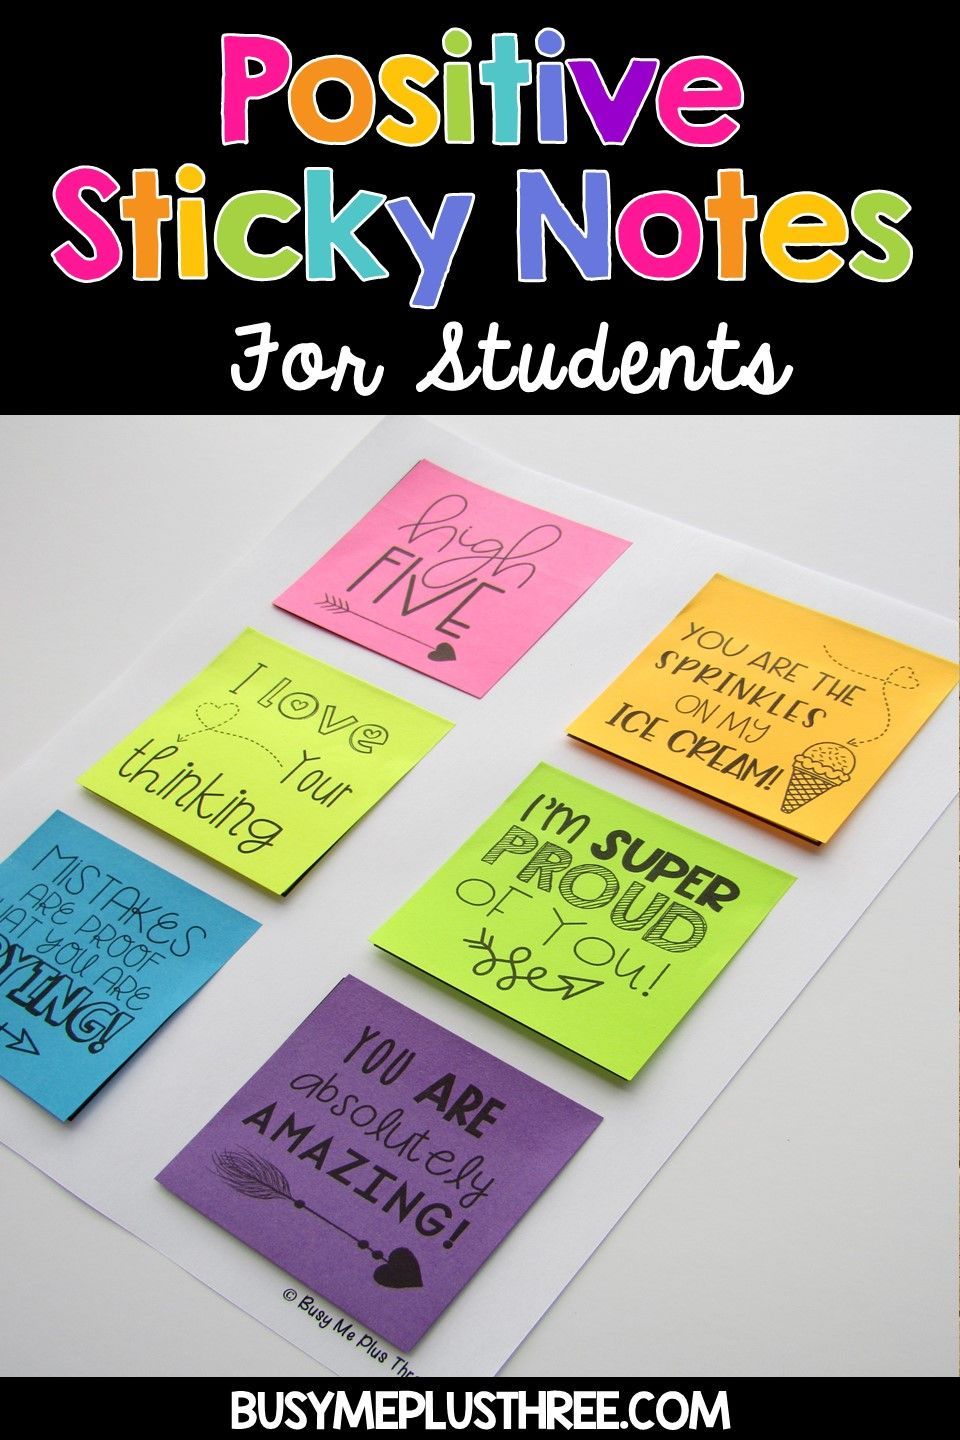 Top 5 Ways Positive Sticky Notes Encourage You Every Day